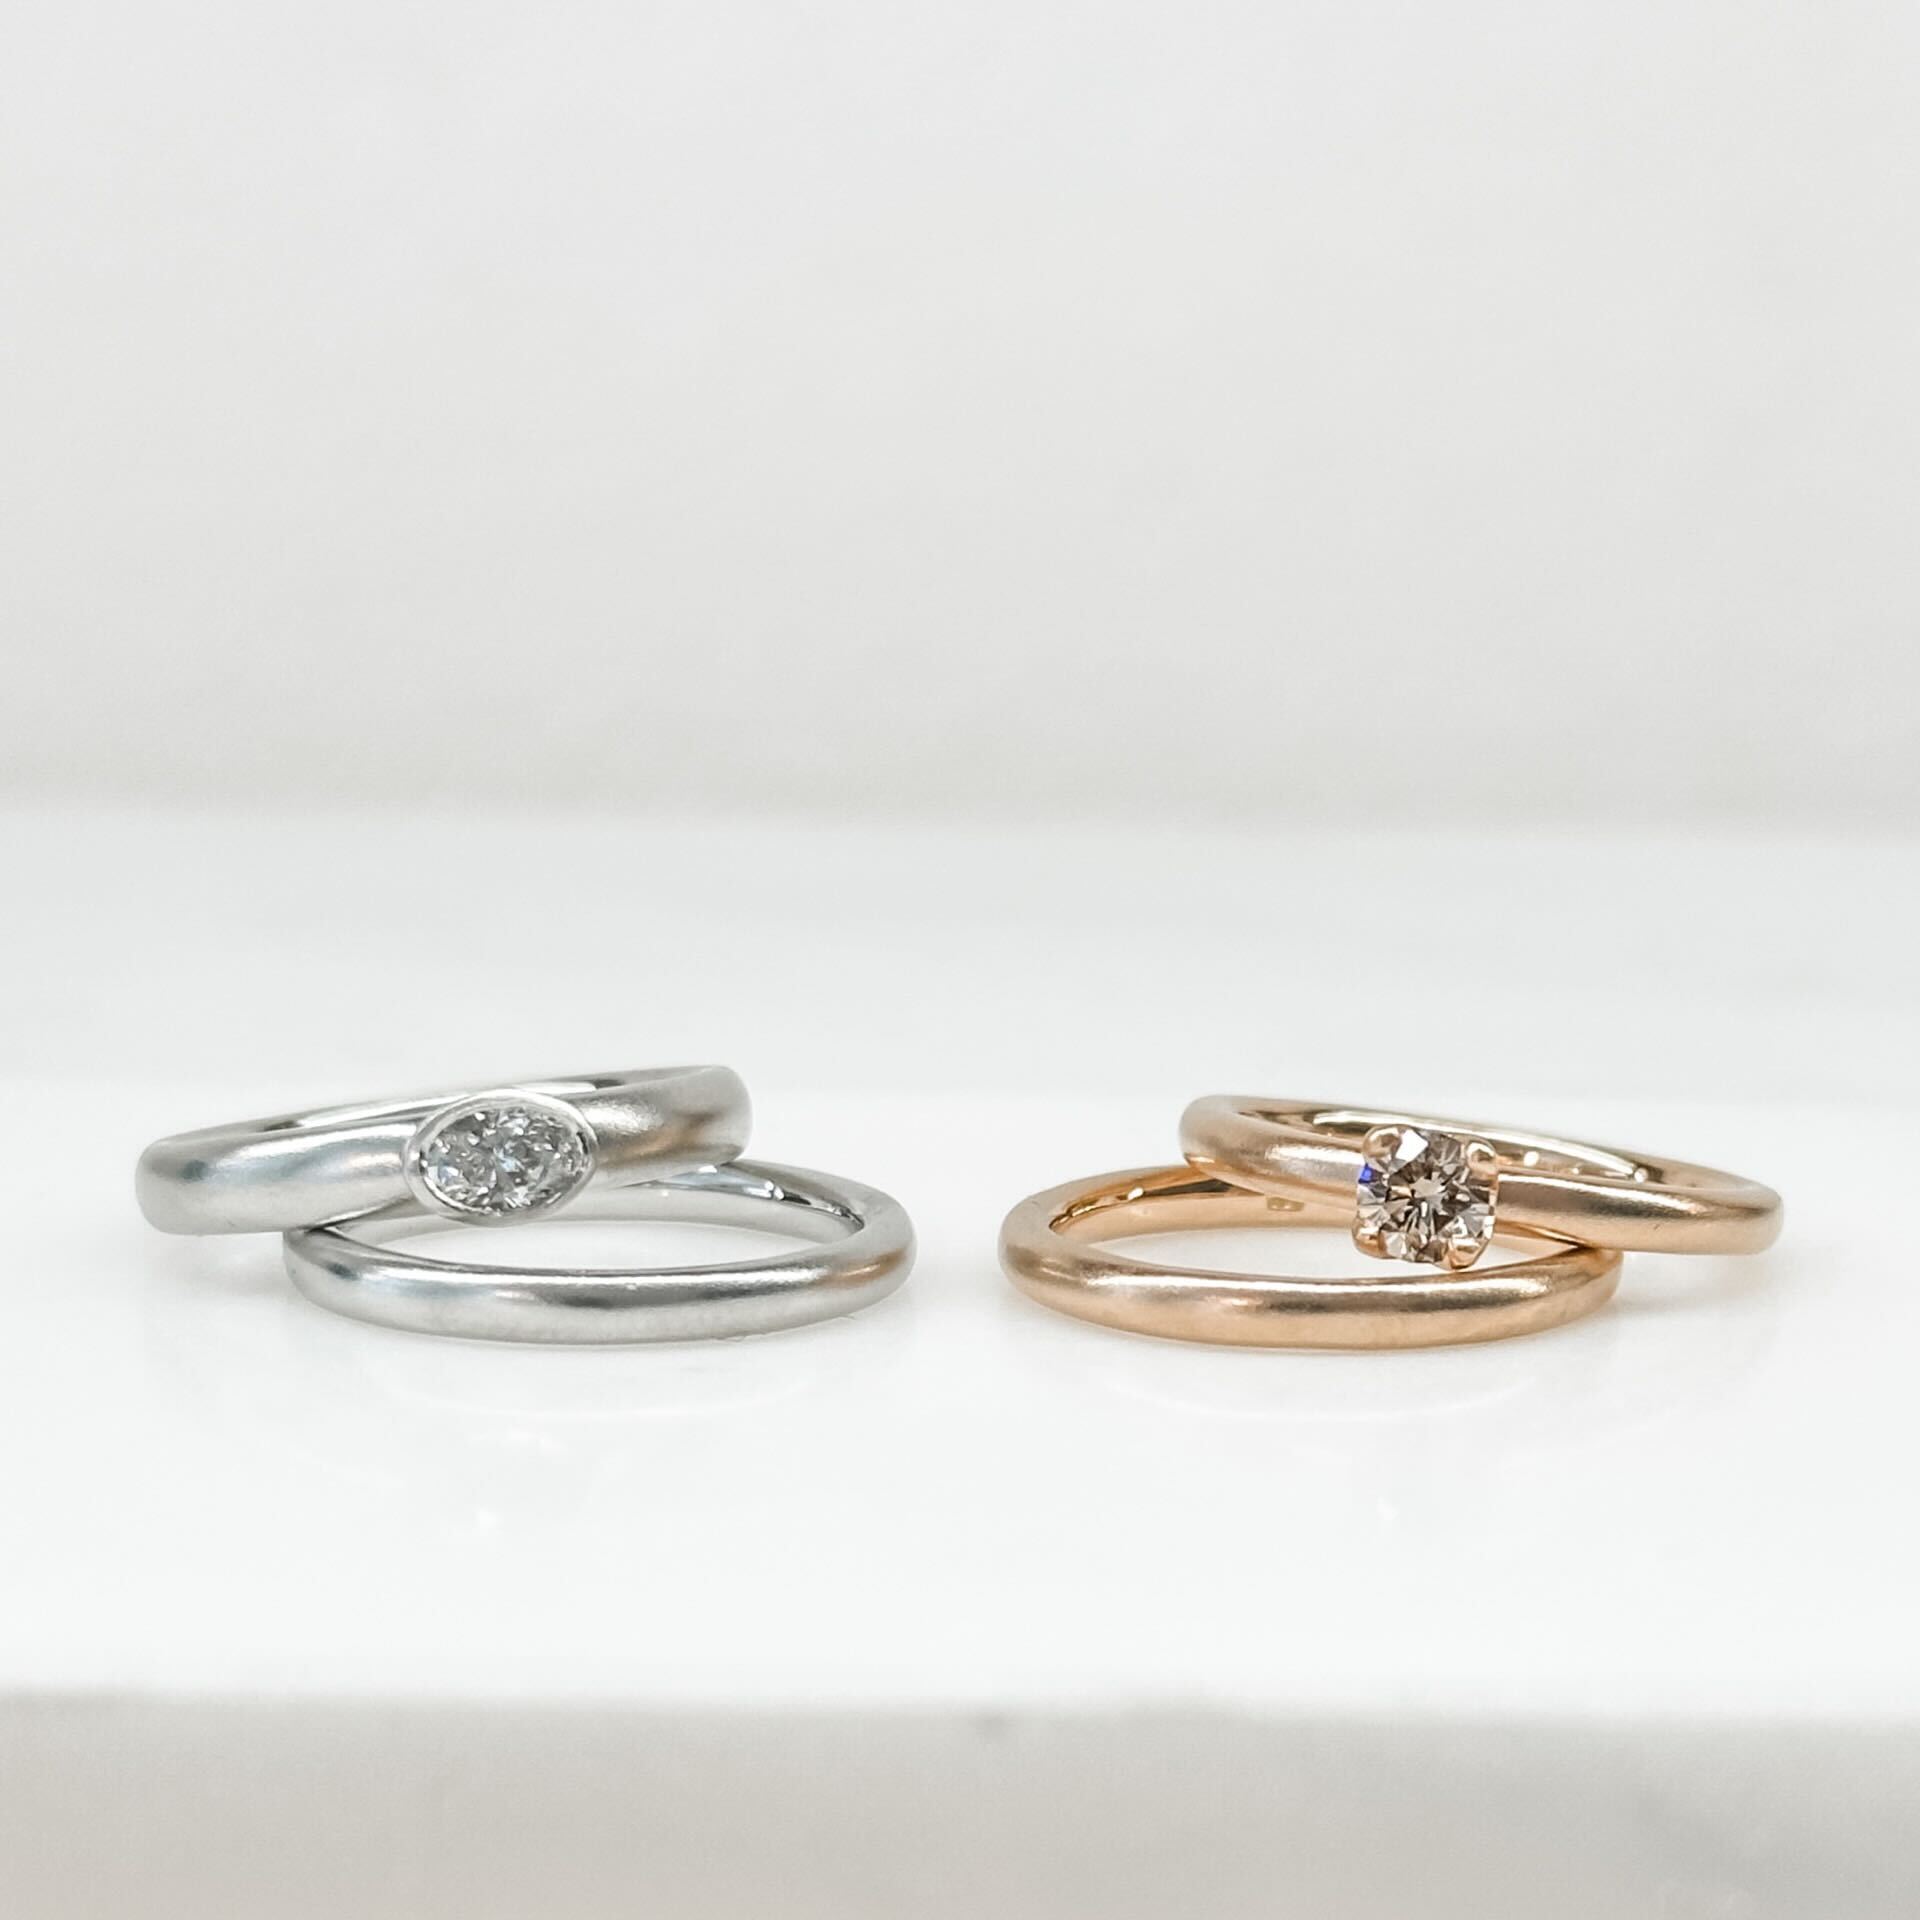 Hers and Hers Diamond engagement rings with wedding rings Jacks Turner Southwest